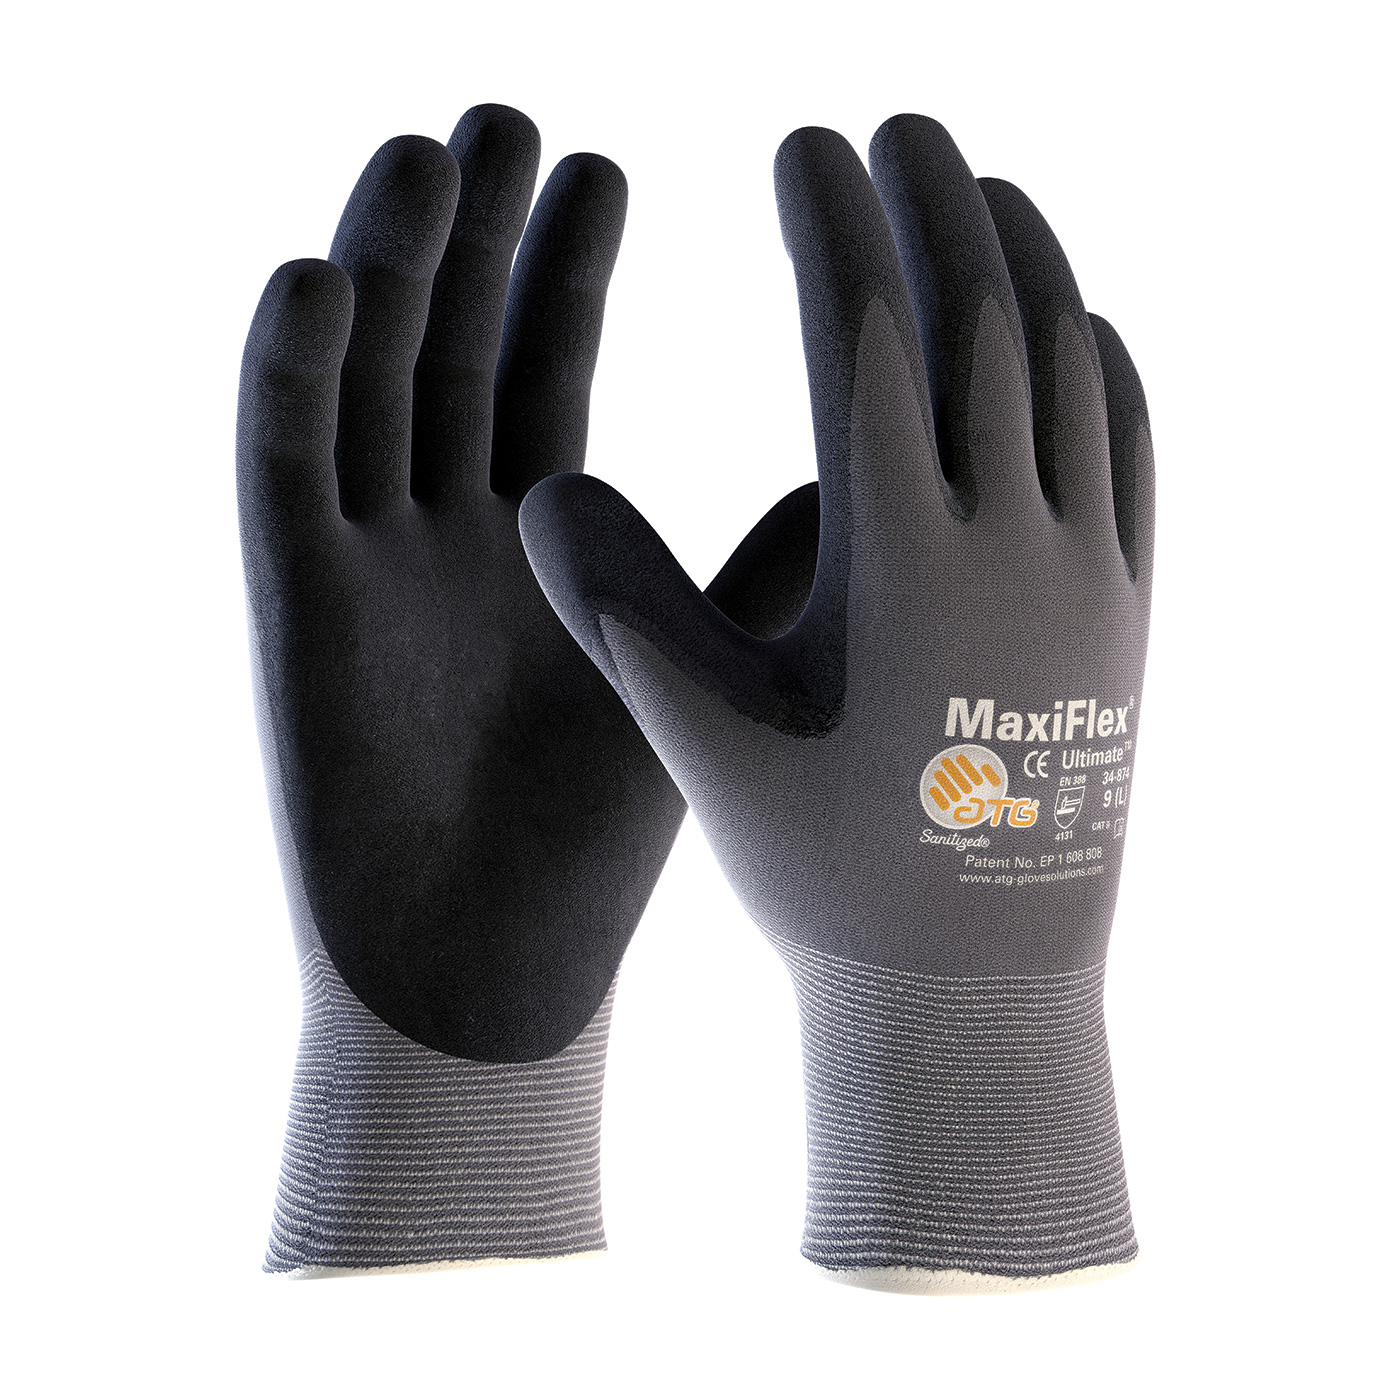 PIP 34-874/S MaxiFlex Ultimate Seamless Knit Nylon/Lycra Glove with Nitrile Coated MicroFoam Grip on Palm & Fingers - Small PID-34 874 S